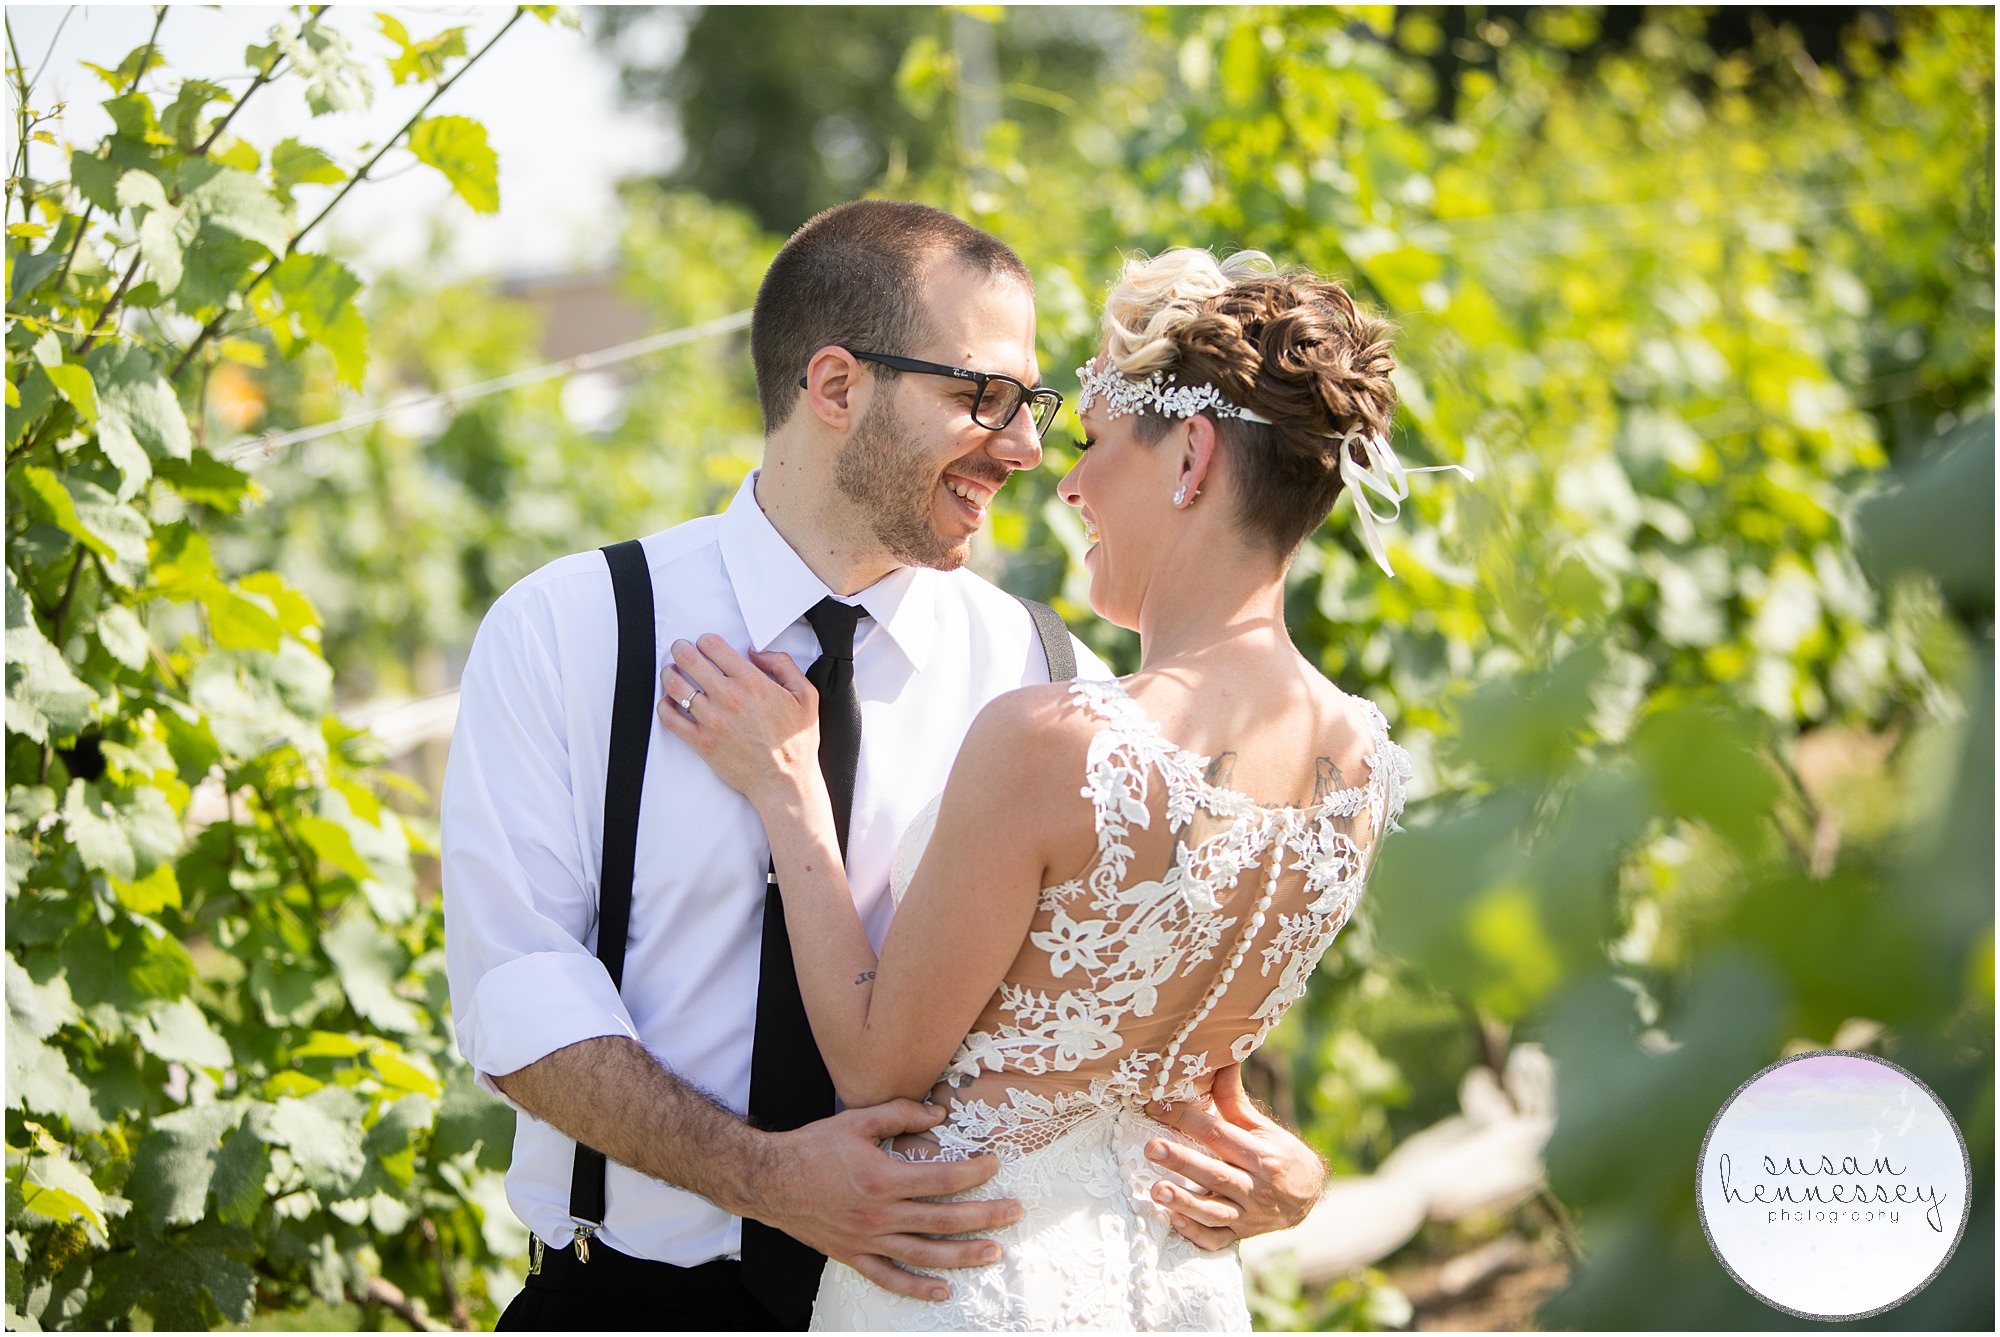 Bride and groom at their Tomasello Winery wedding